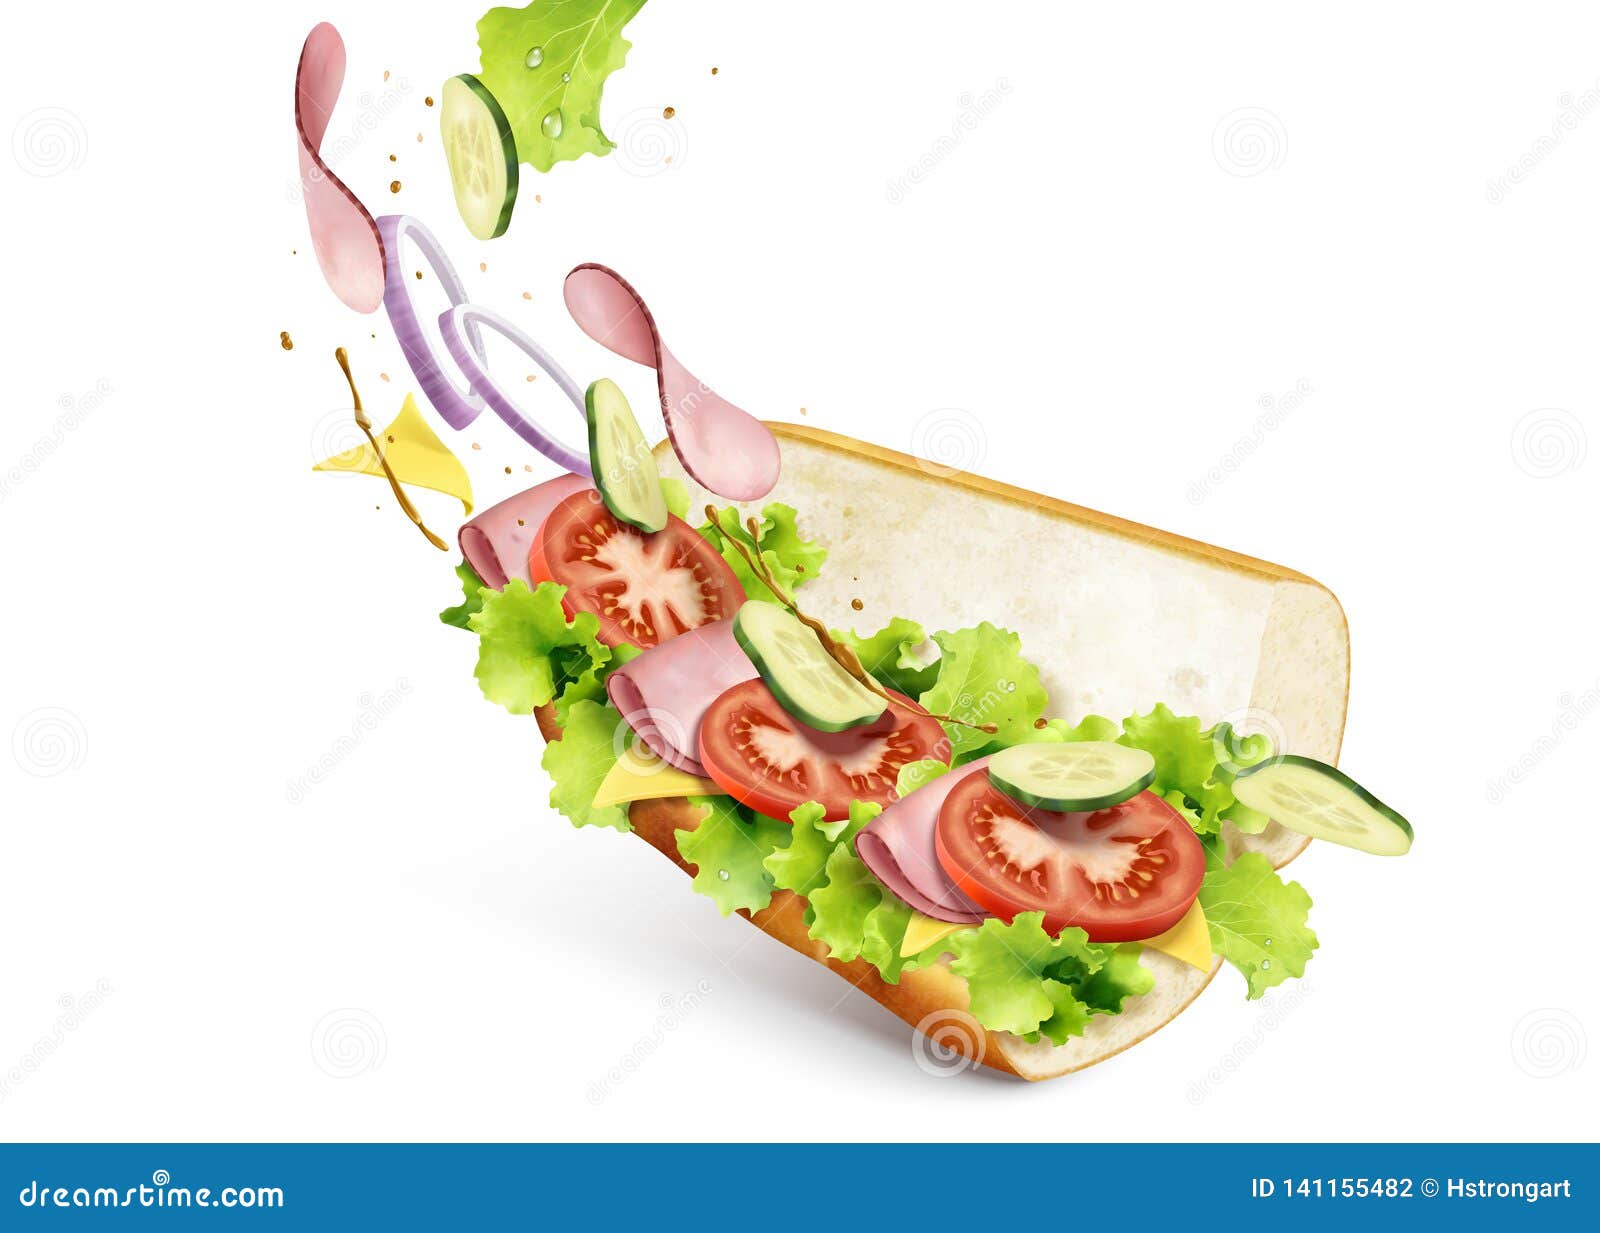 submarine sandwich with fillings